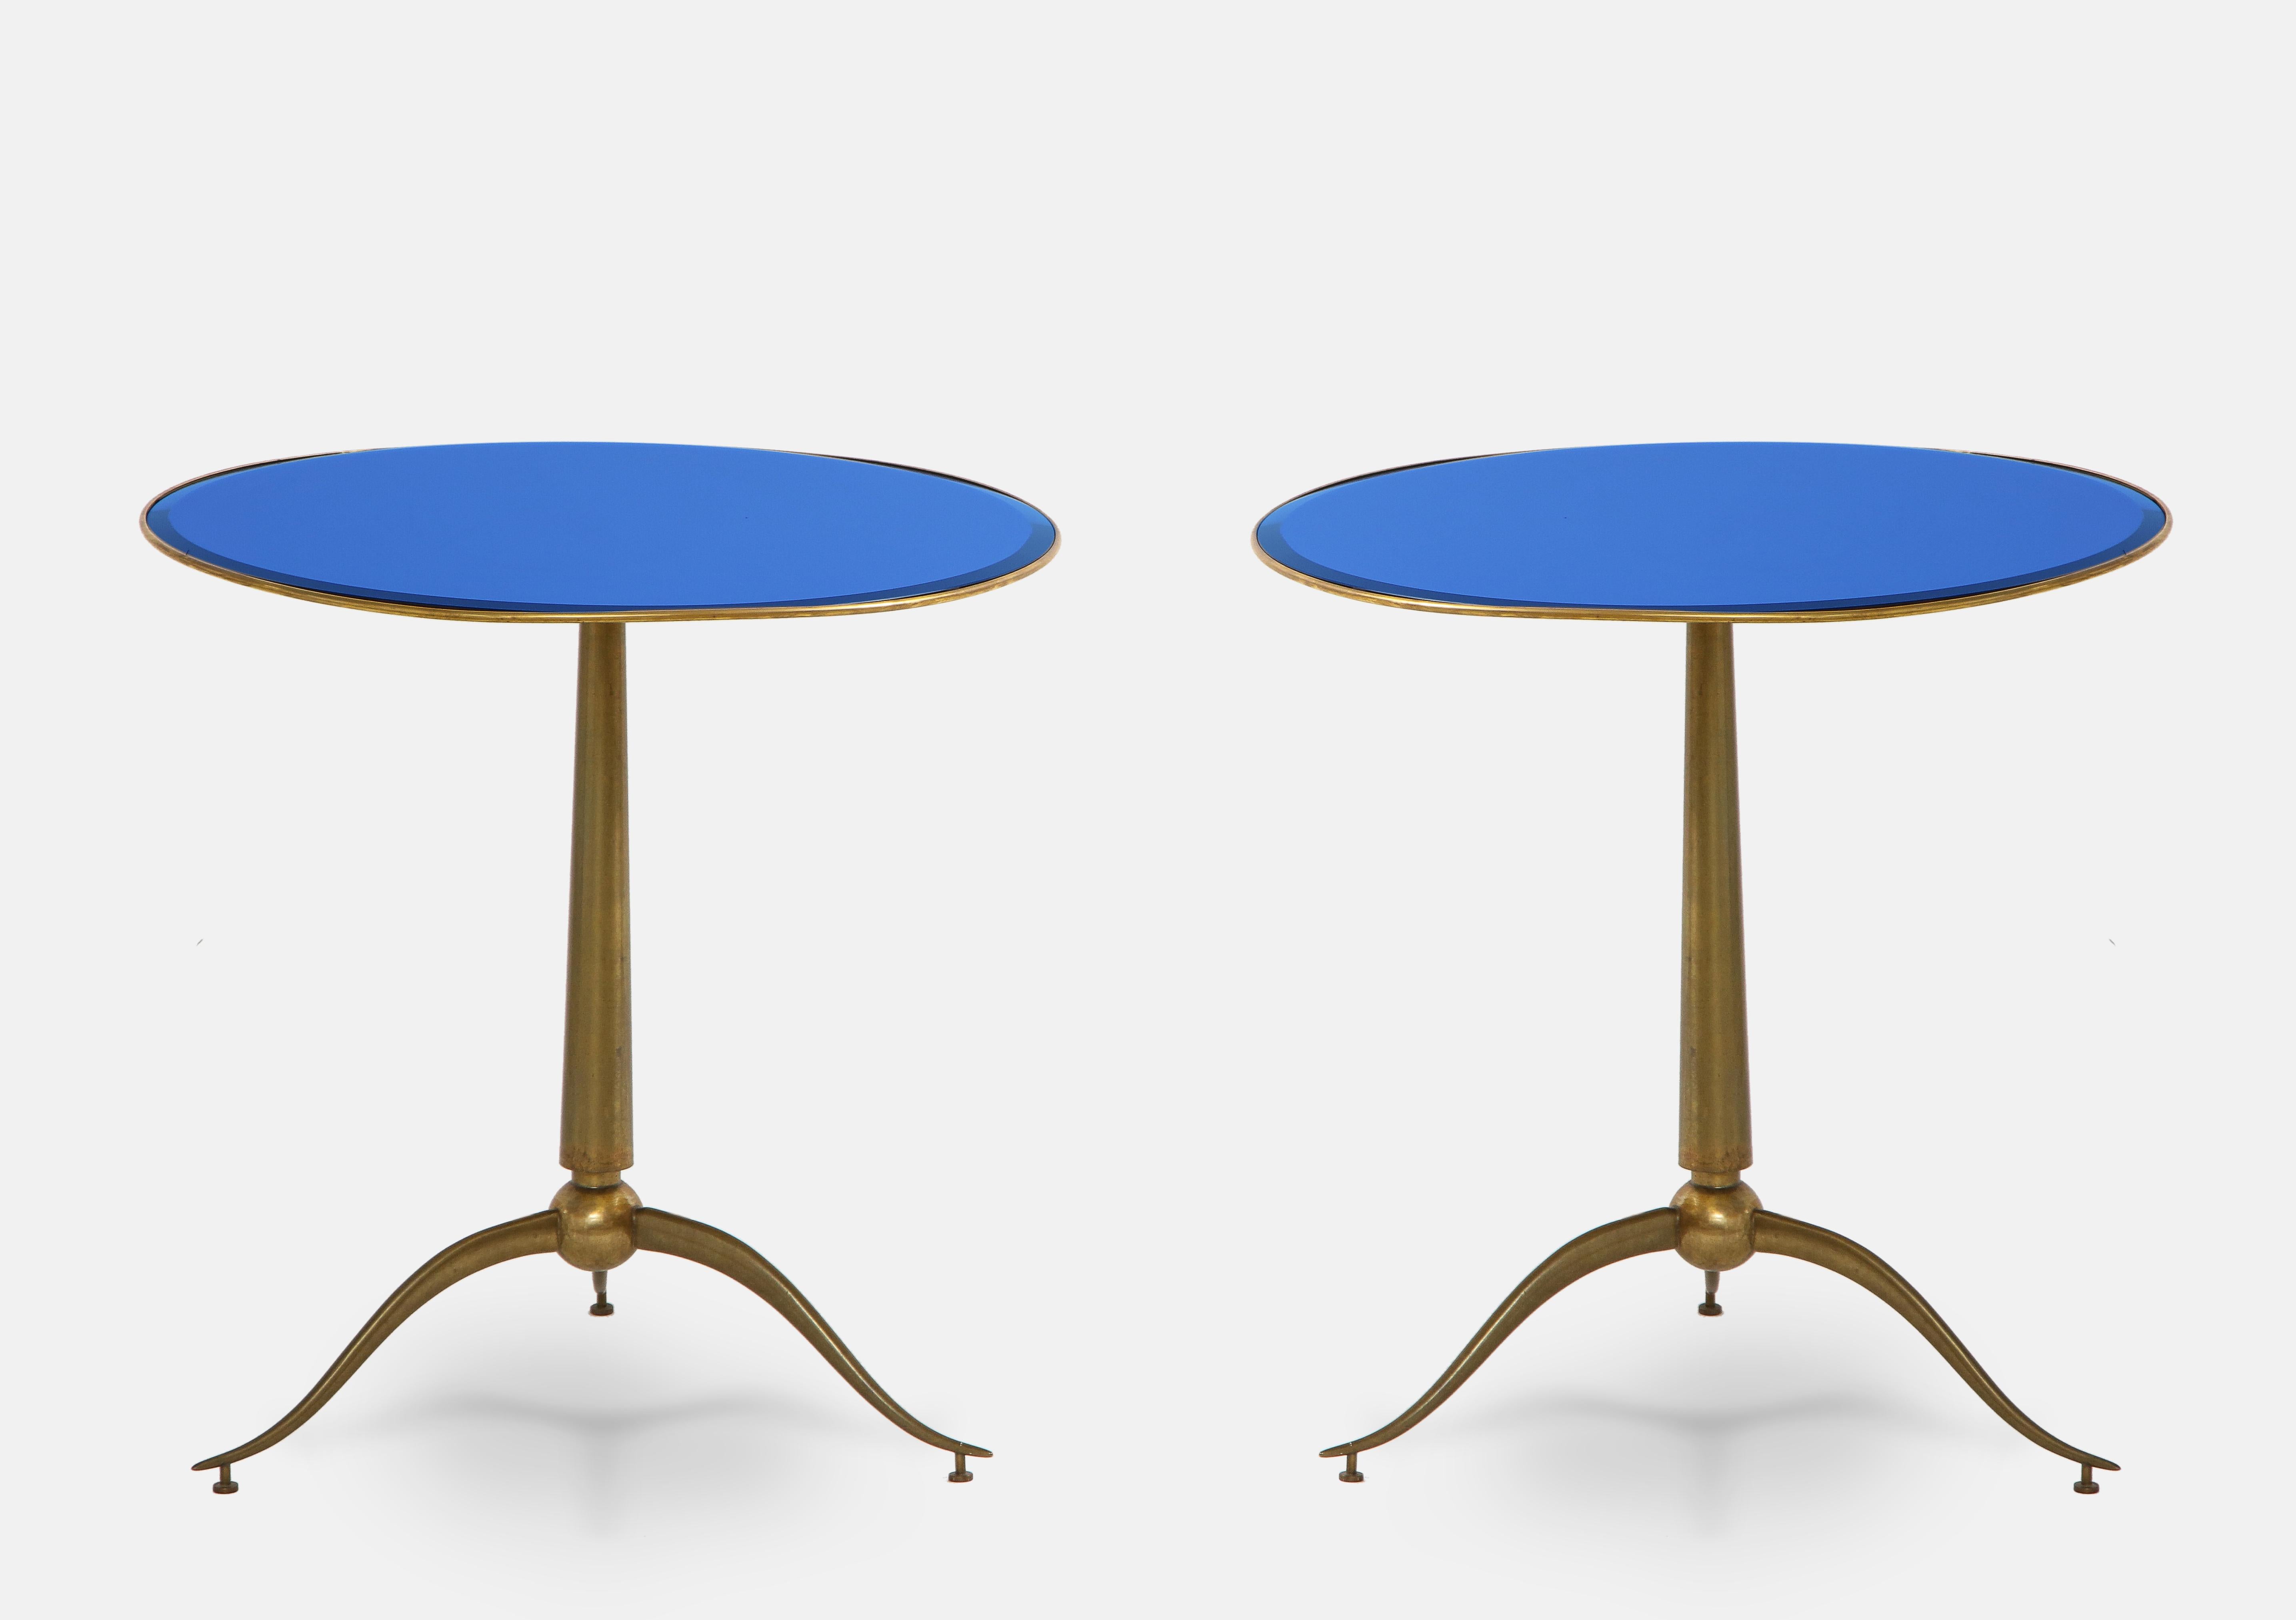 Rare pair of stunning round side tables with brass top and inset beveled blue glass on elegant brass tripod base, designed by Osvaldo Borsani and manufactured by Arredamenti Borsani Varedo, Milan, 1950s. Beautifully elegant lines and proportions in